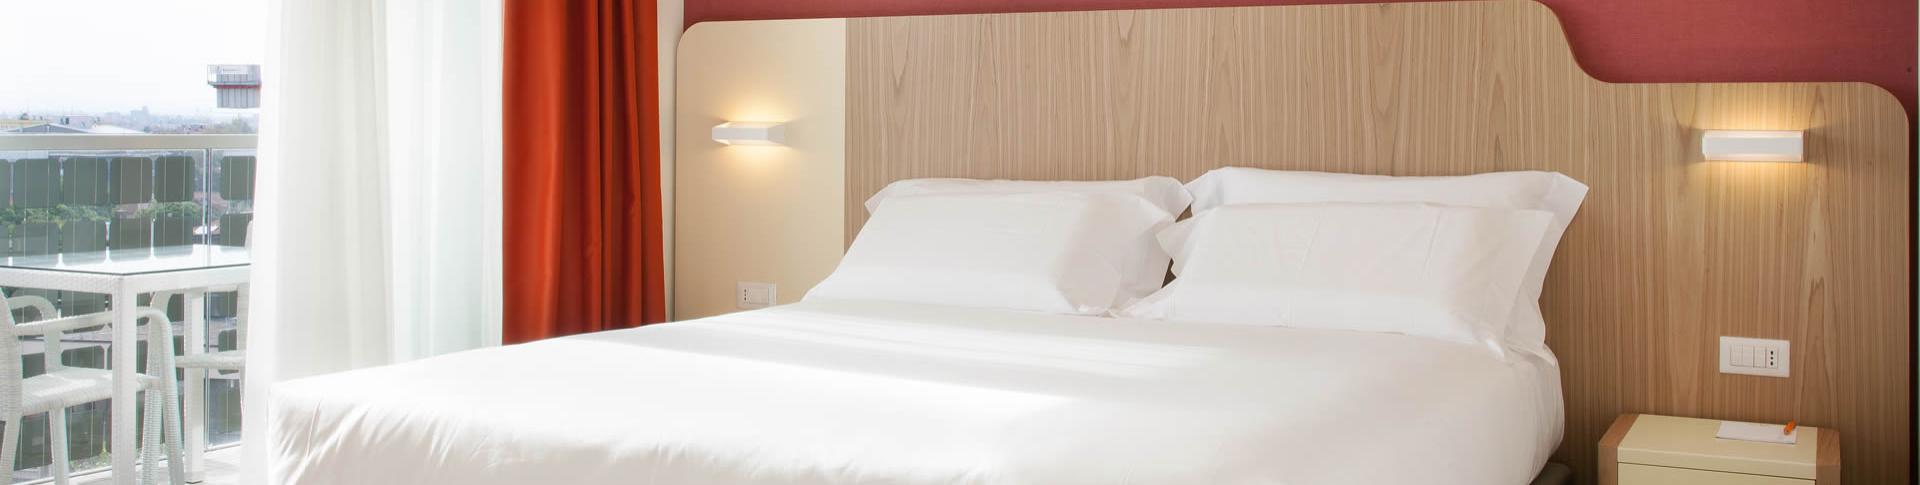 ariahotel fr chambre-quality 013